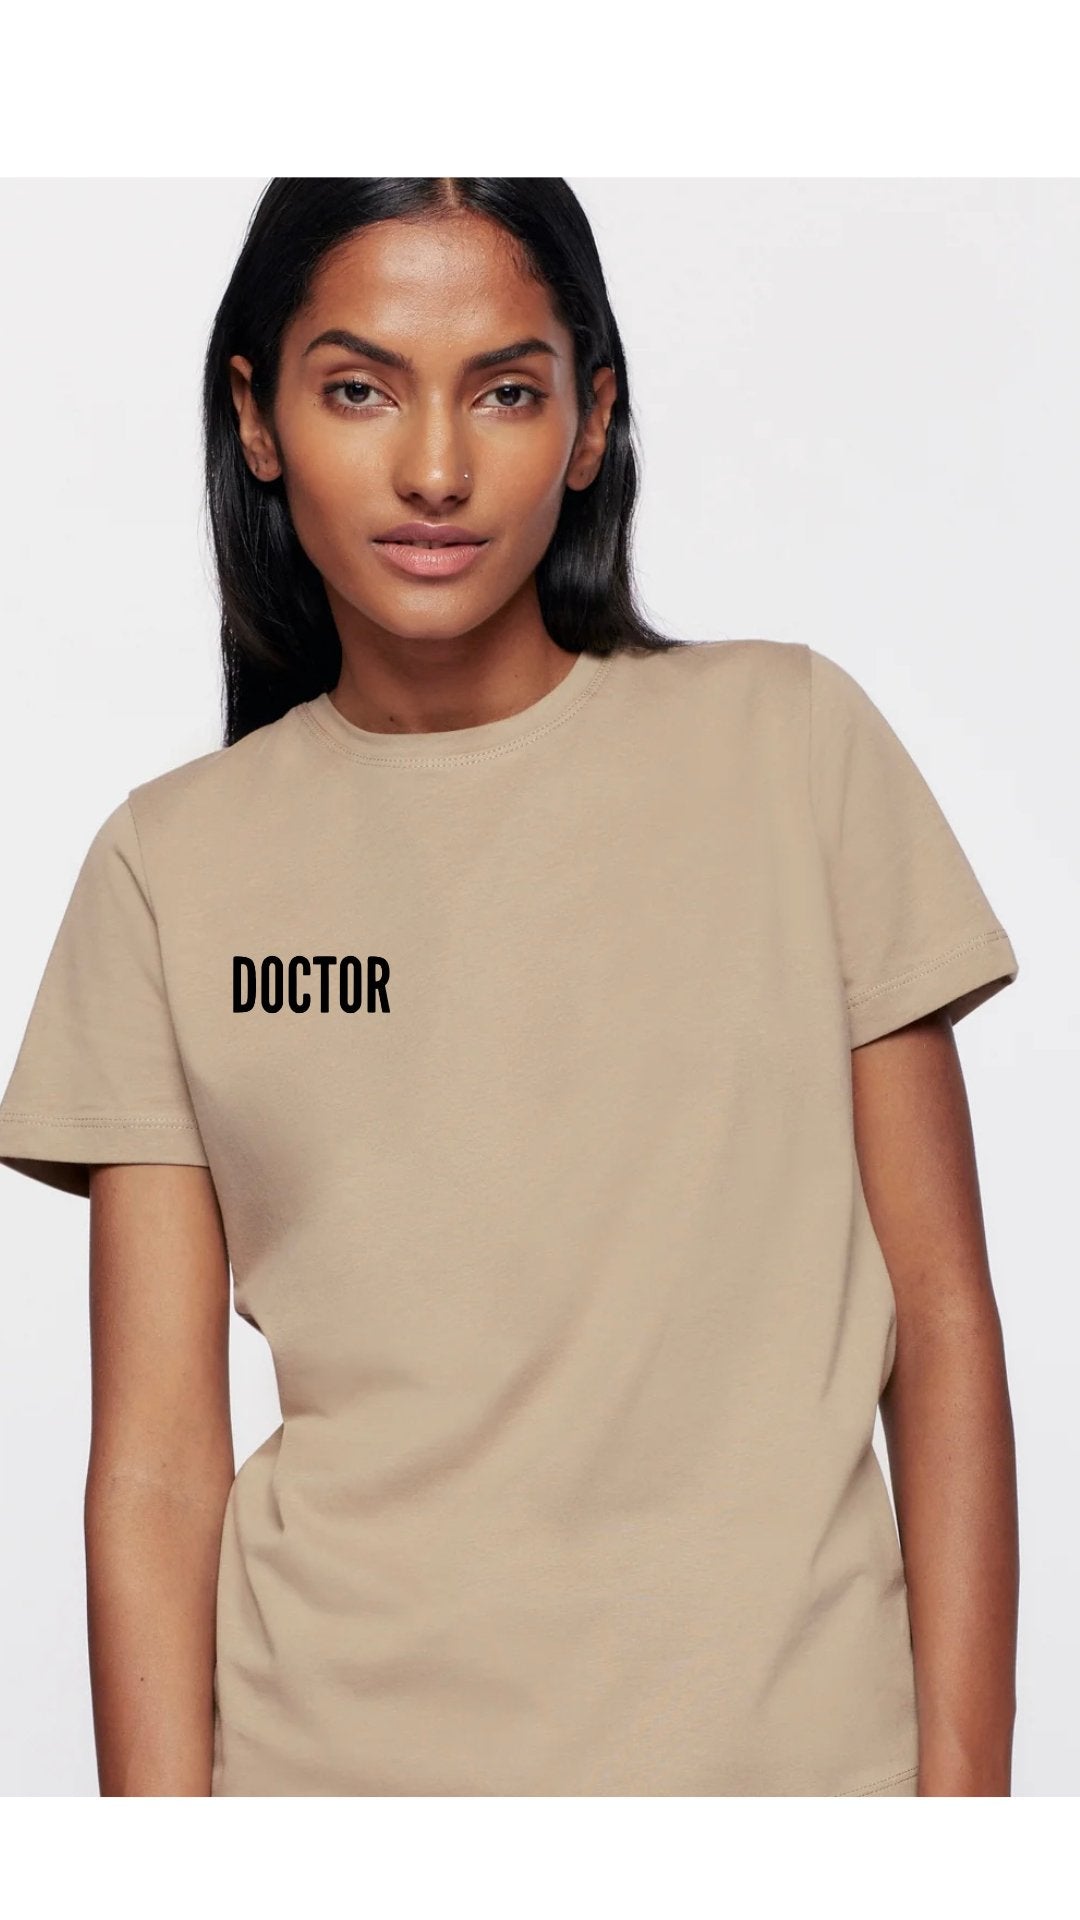 Hi, my name is "DOCTOR______" Luxury Unisex T-shirt - The Woman Doctor